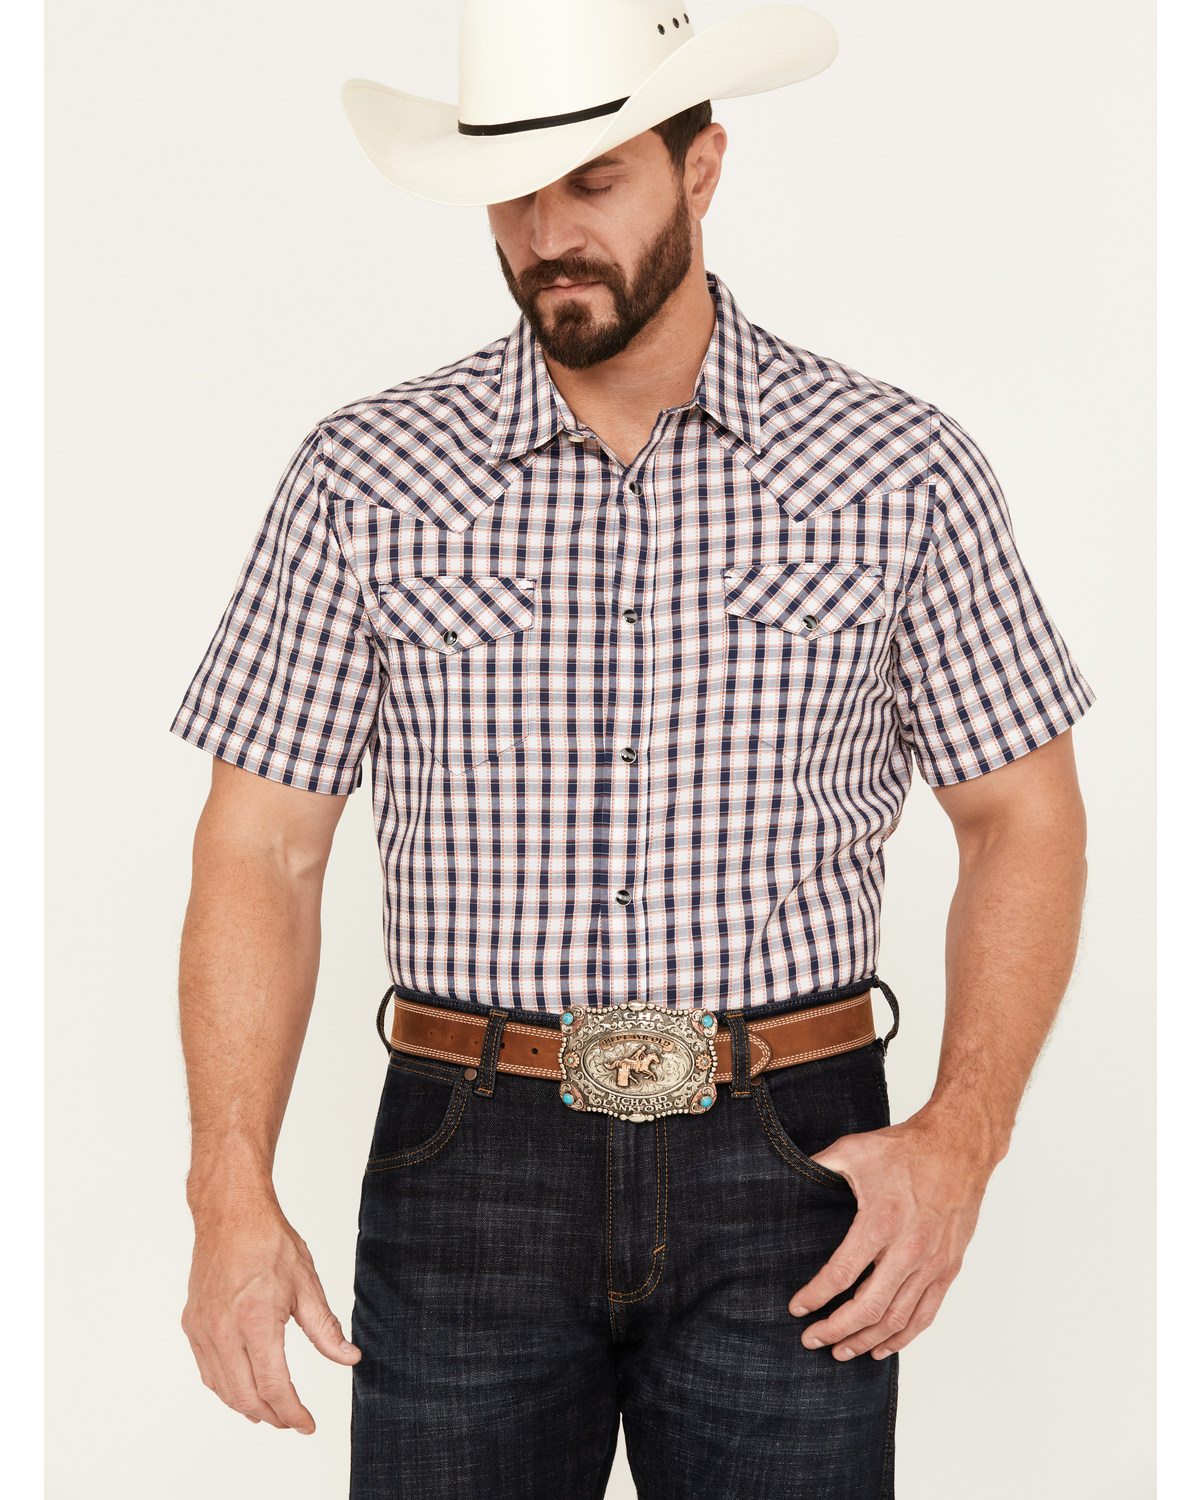 Gibson Trading Co Men's Pointed Arrow Plaid Short Sleeve Western Snap Shirt